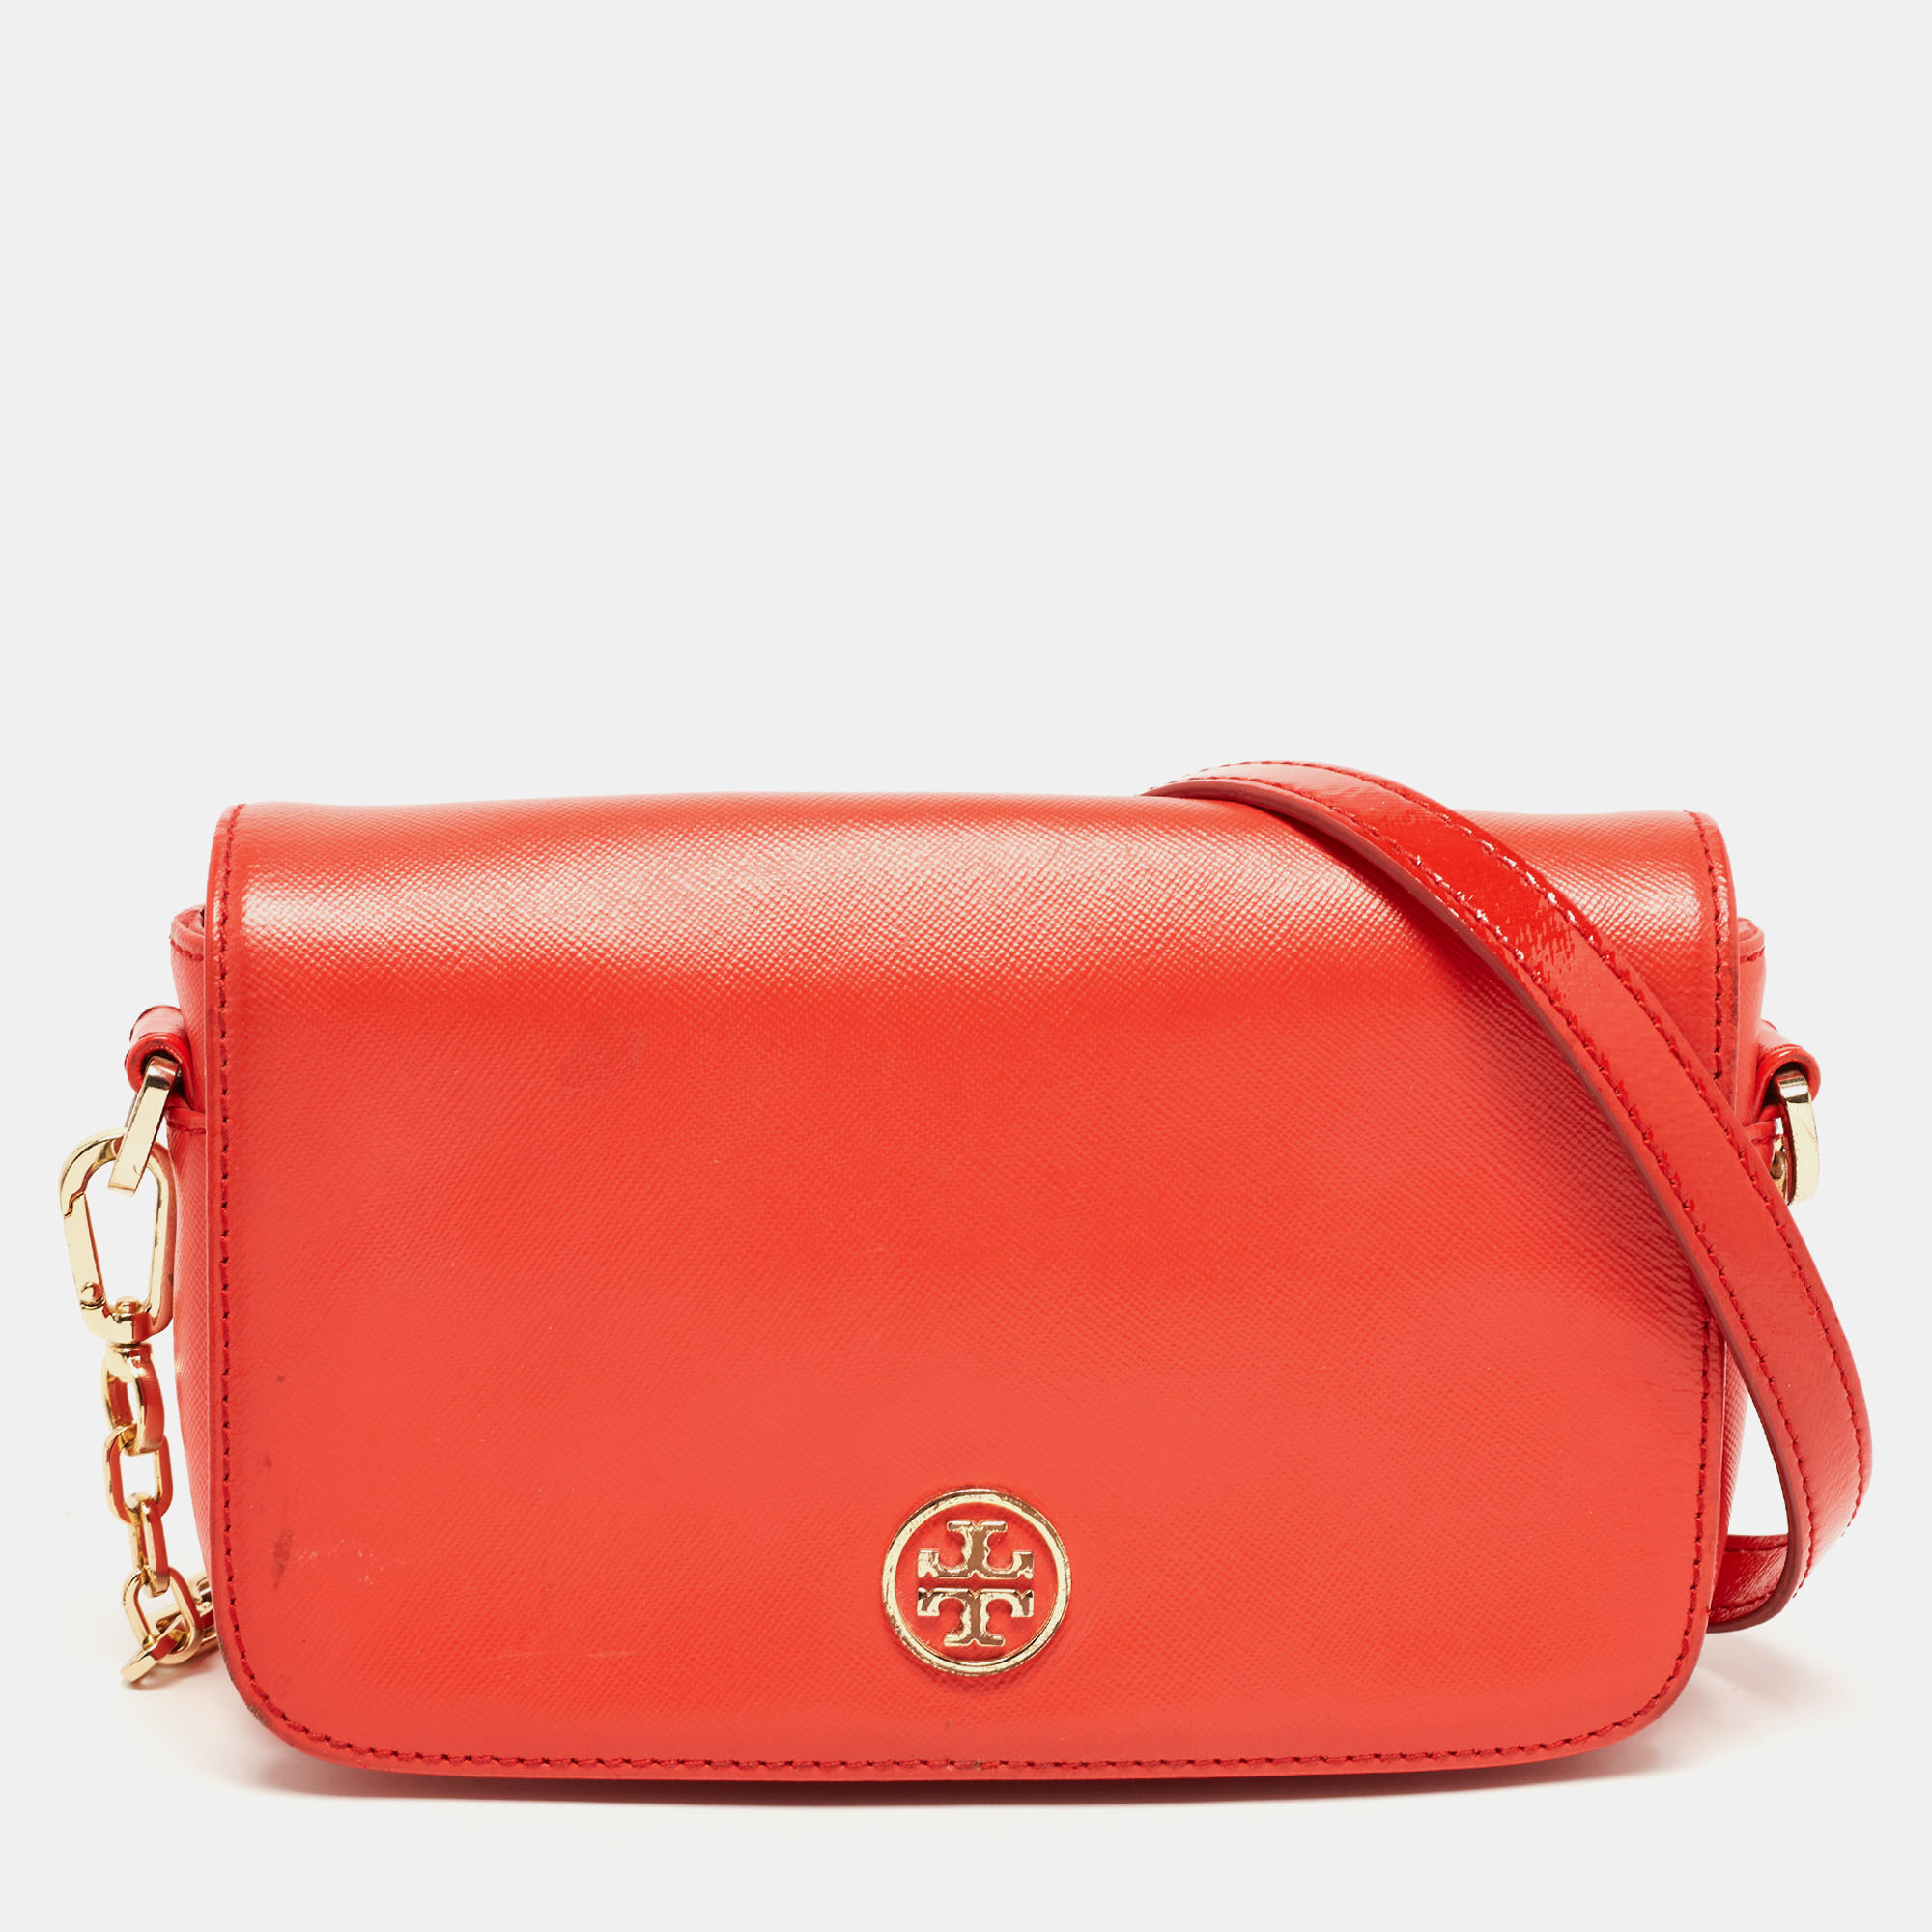 Pre-owned Tory Burch Orange Patent And Leather Mini Robinson Crossbody Bag